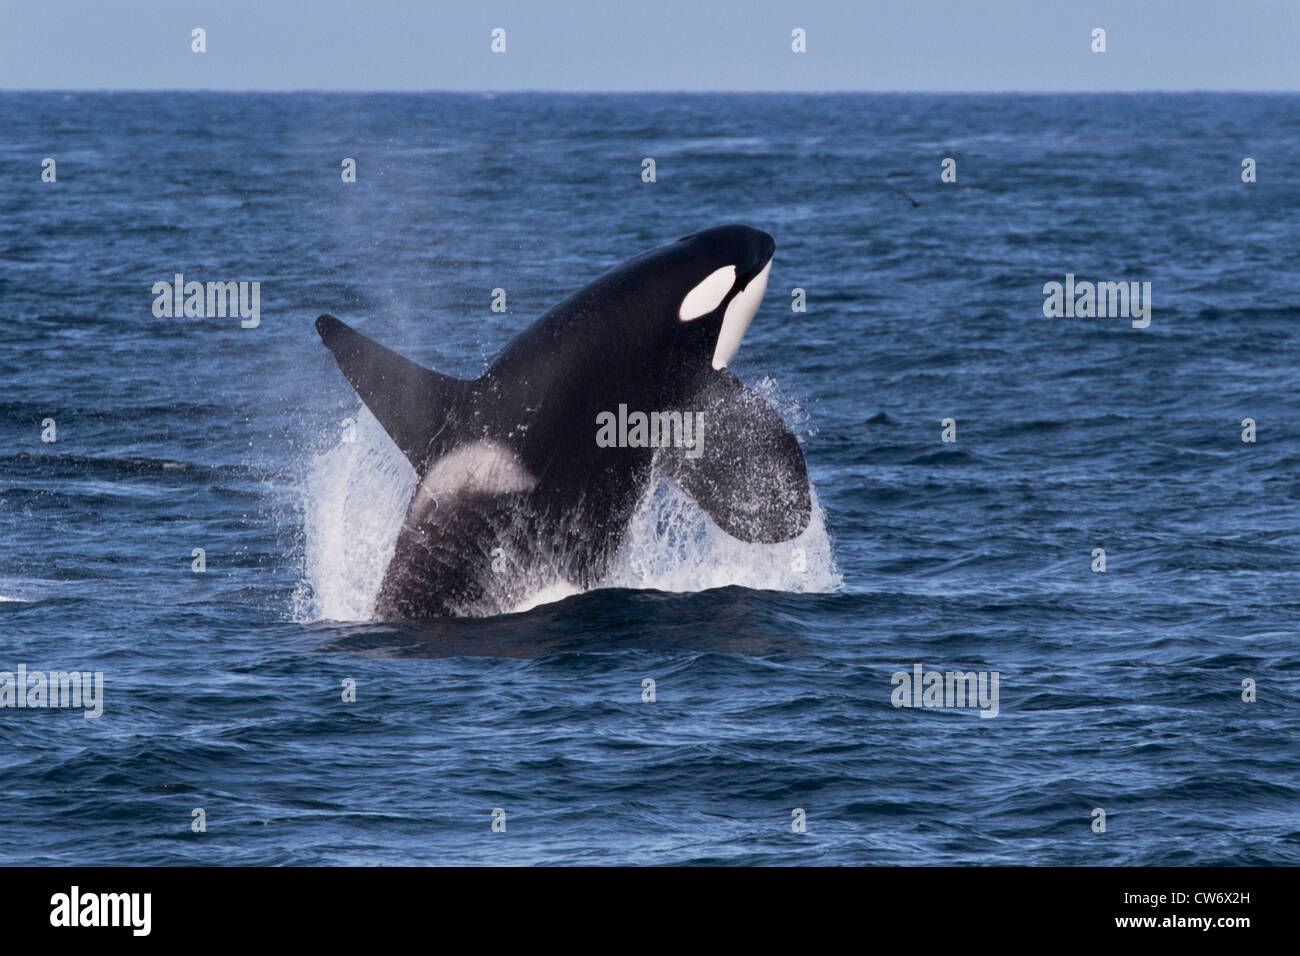 Transient Killer Whale/Orca (Orcinus orca). Large adult male breaching, Monterey, California, Pacific Ocean. Stock Photo